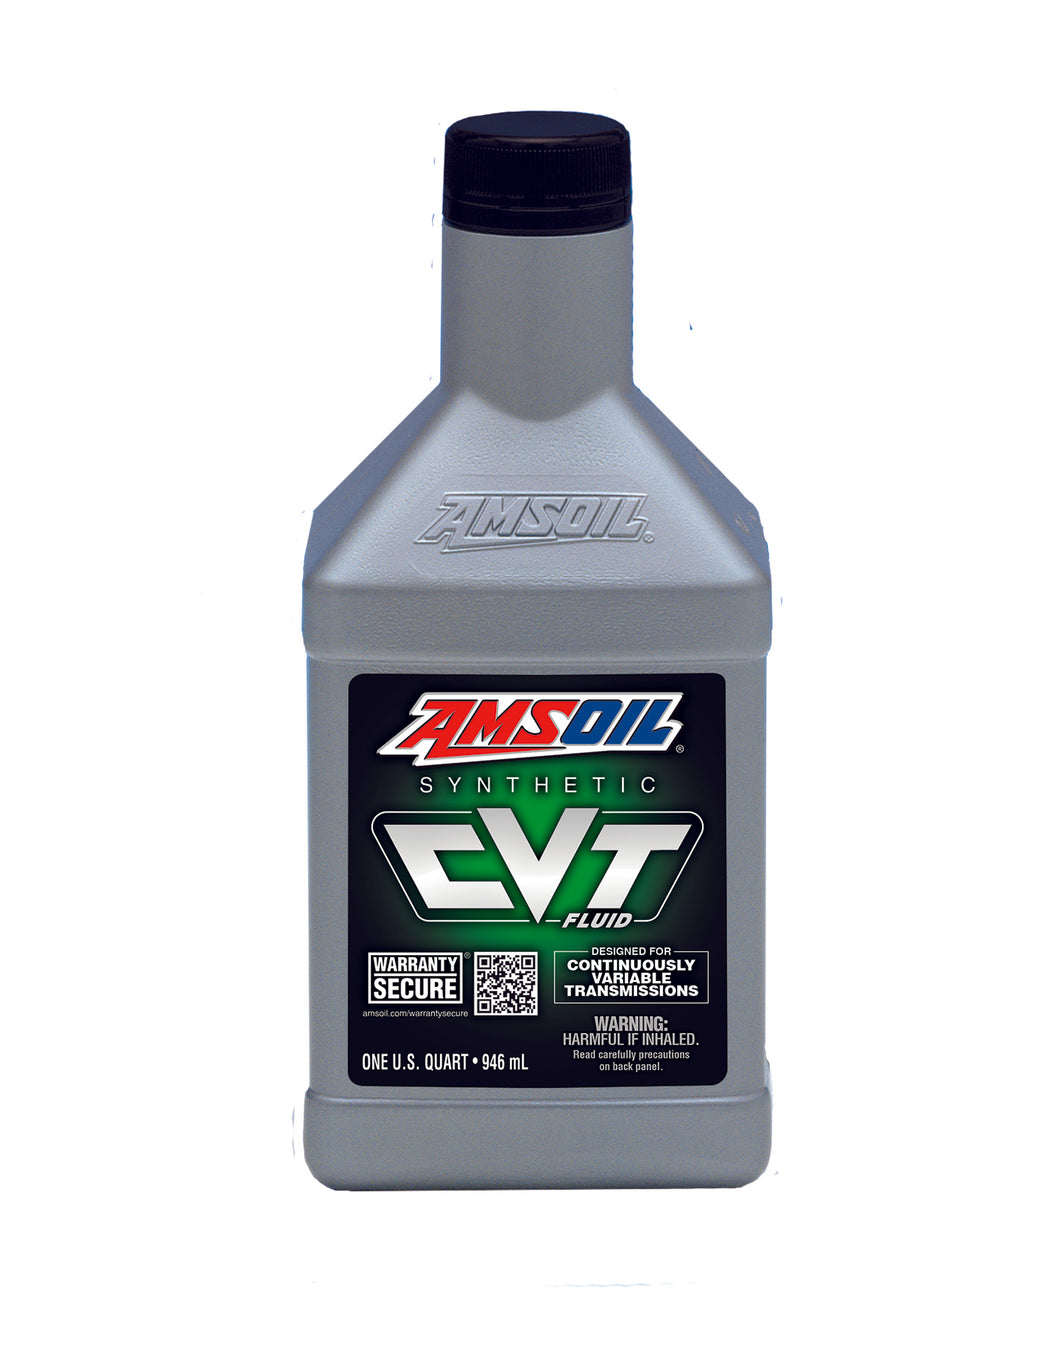 Synthetic CVT Fluid ( Contact us to price and purchase )